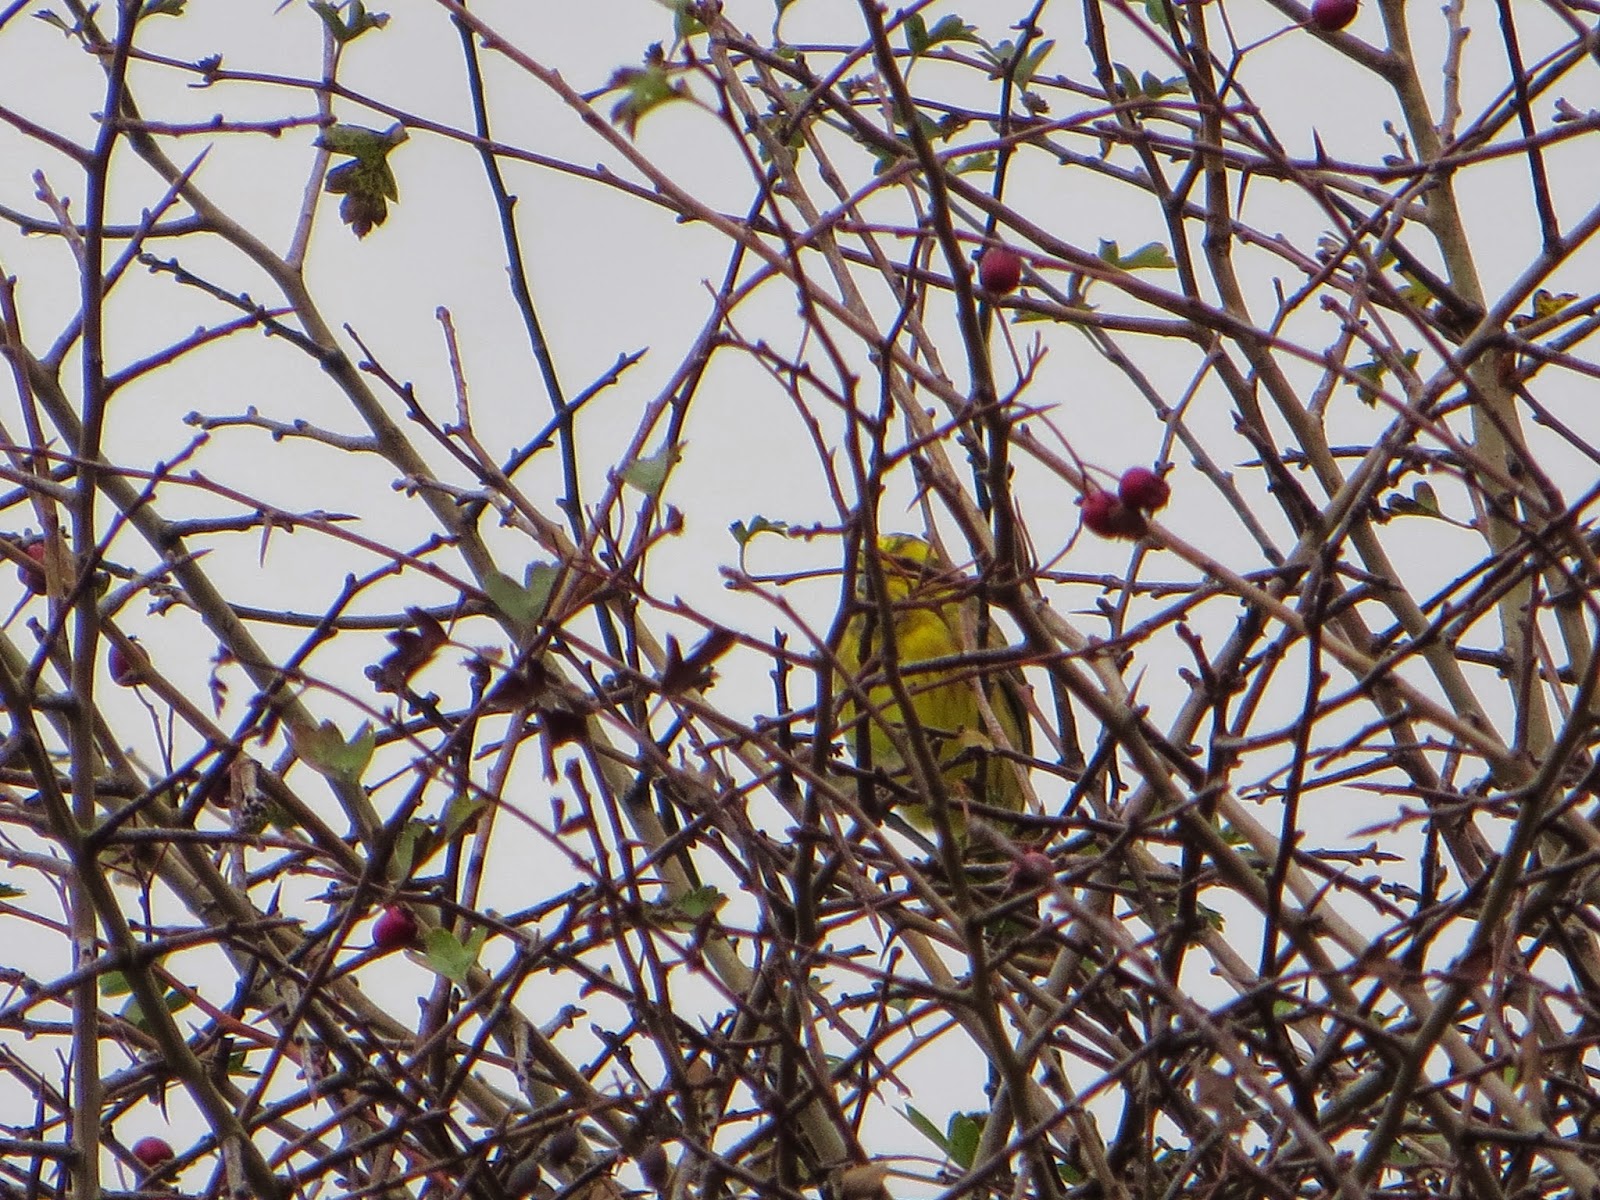 A flock of Yellowhammers sining merrily and having fun in the fields.